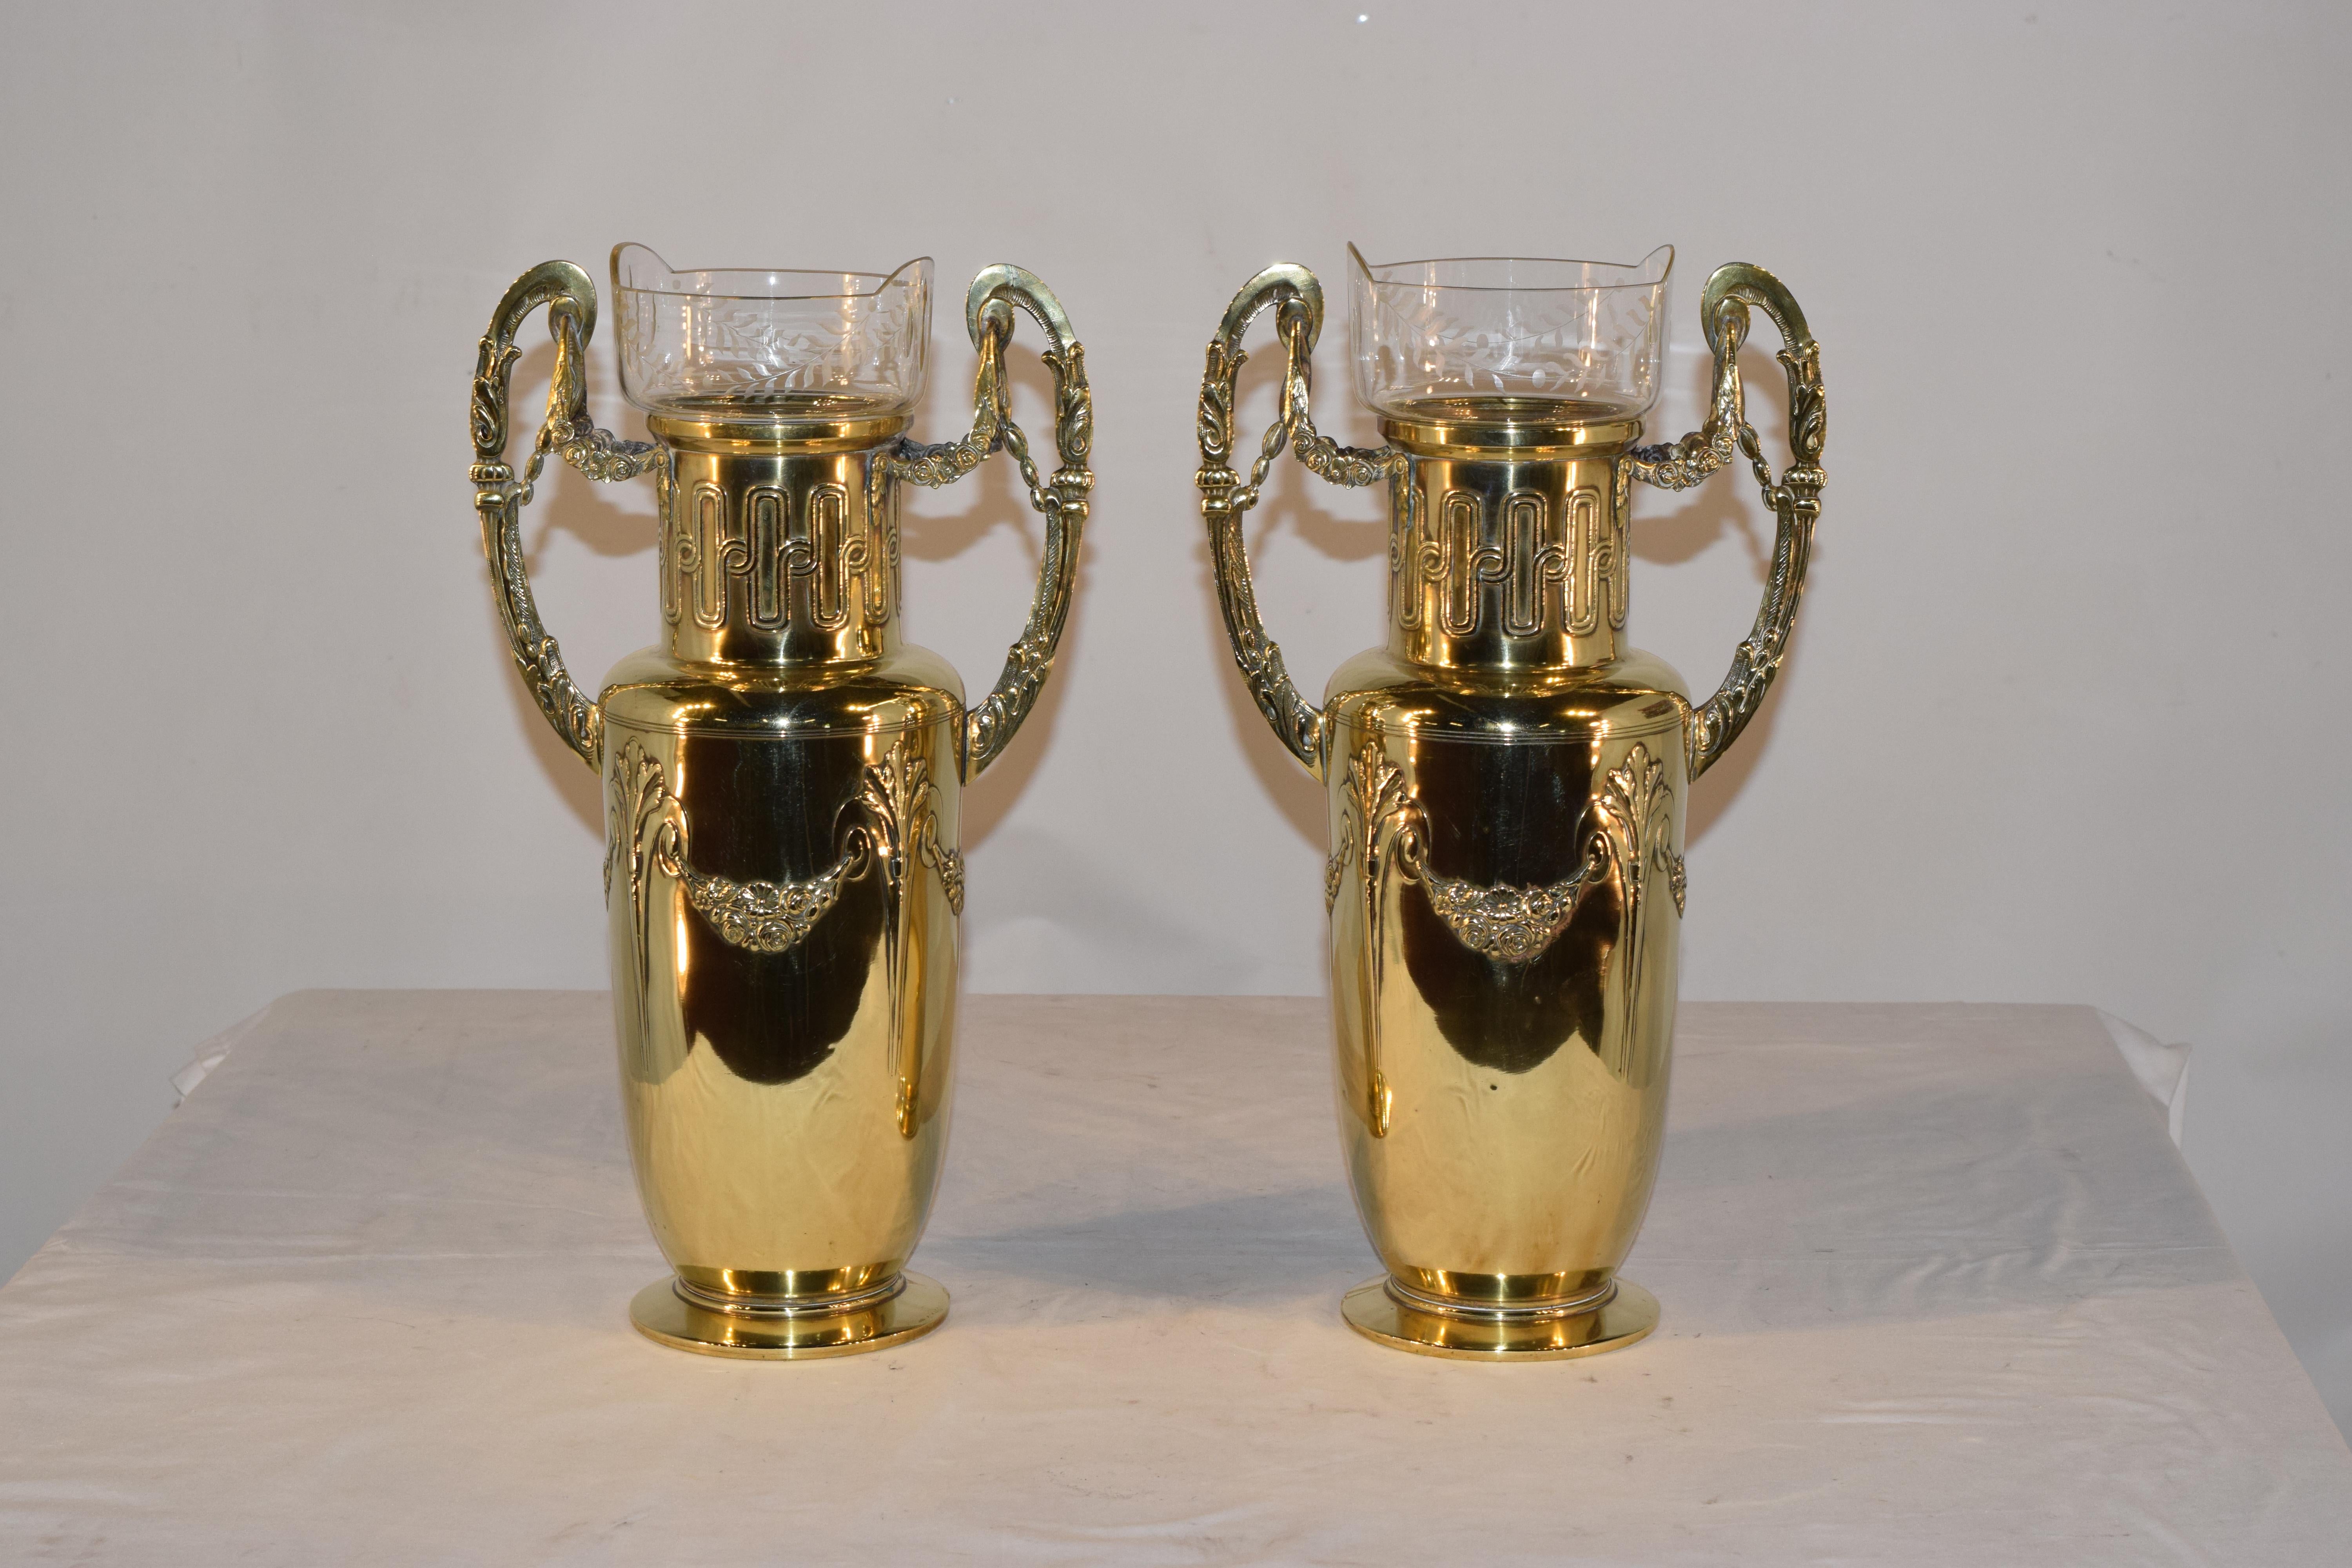 Pair of 19th century hand cast brass vases with elegantly shaped handles which have floral swags and columns, connected to the bases, which are decorated with geometric shapes and acanthus leaf shapes, joined by floral swags. The vases retain their